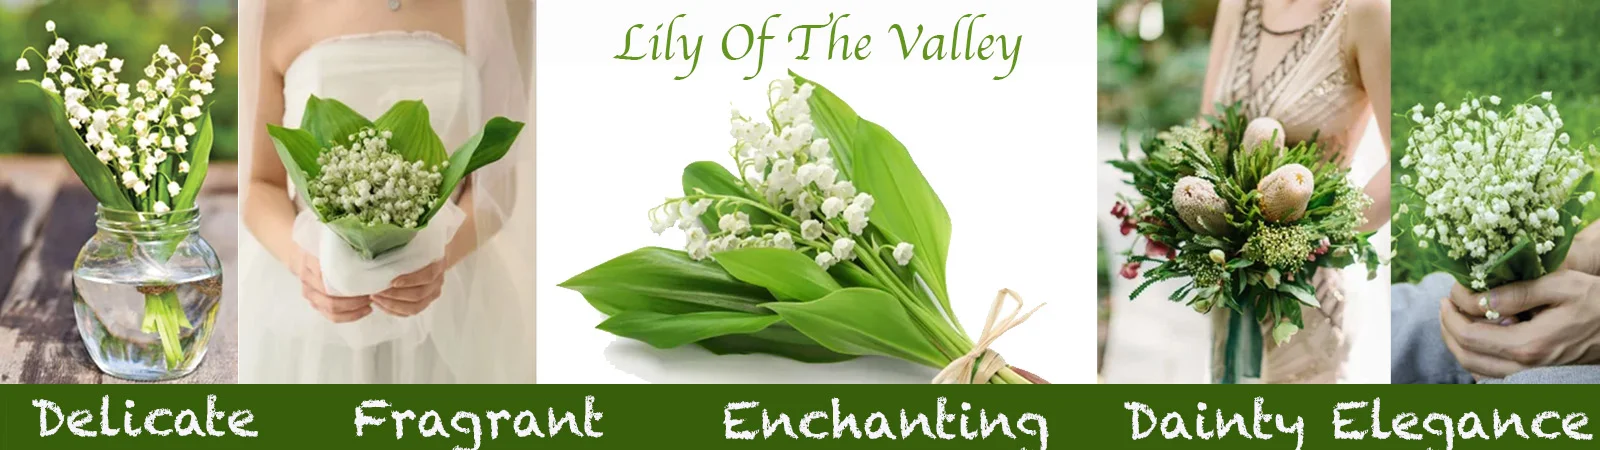 Lily Of The Valley Near Me